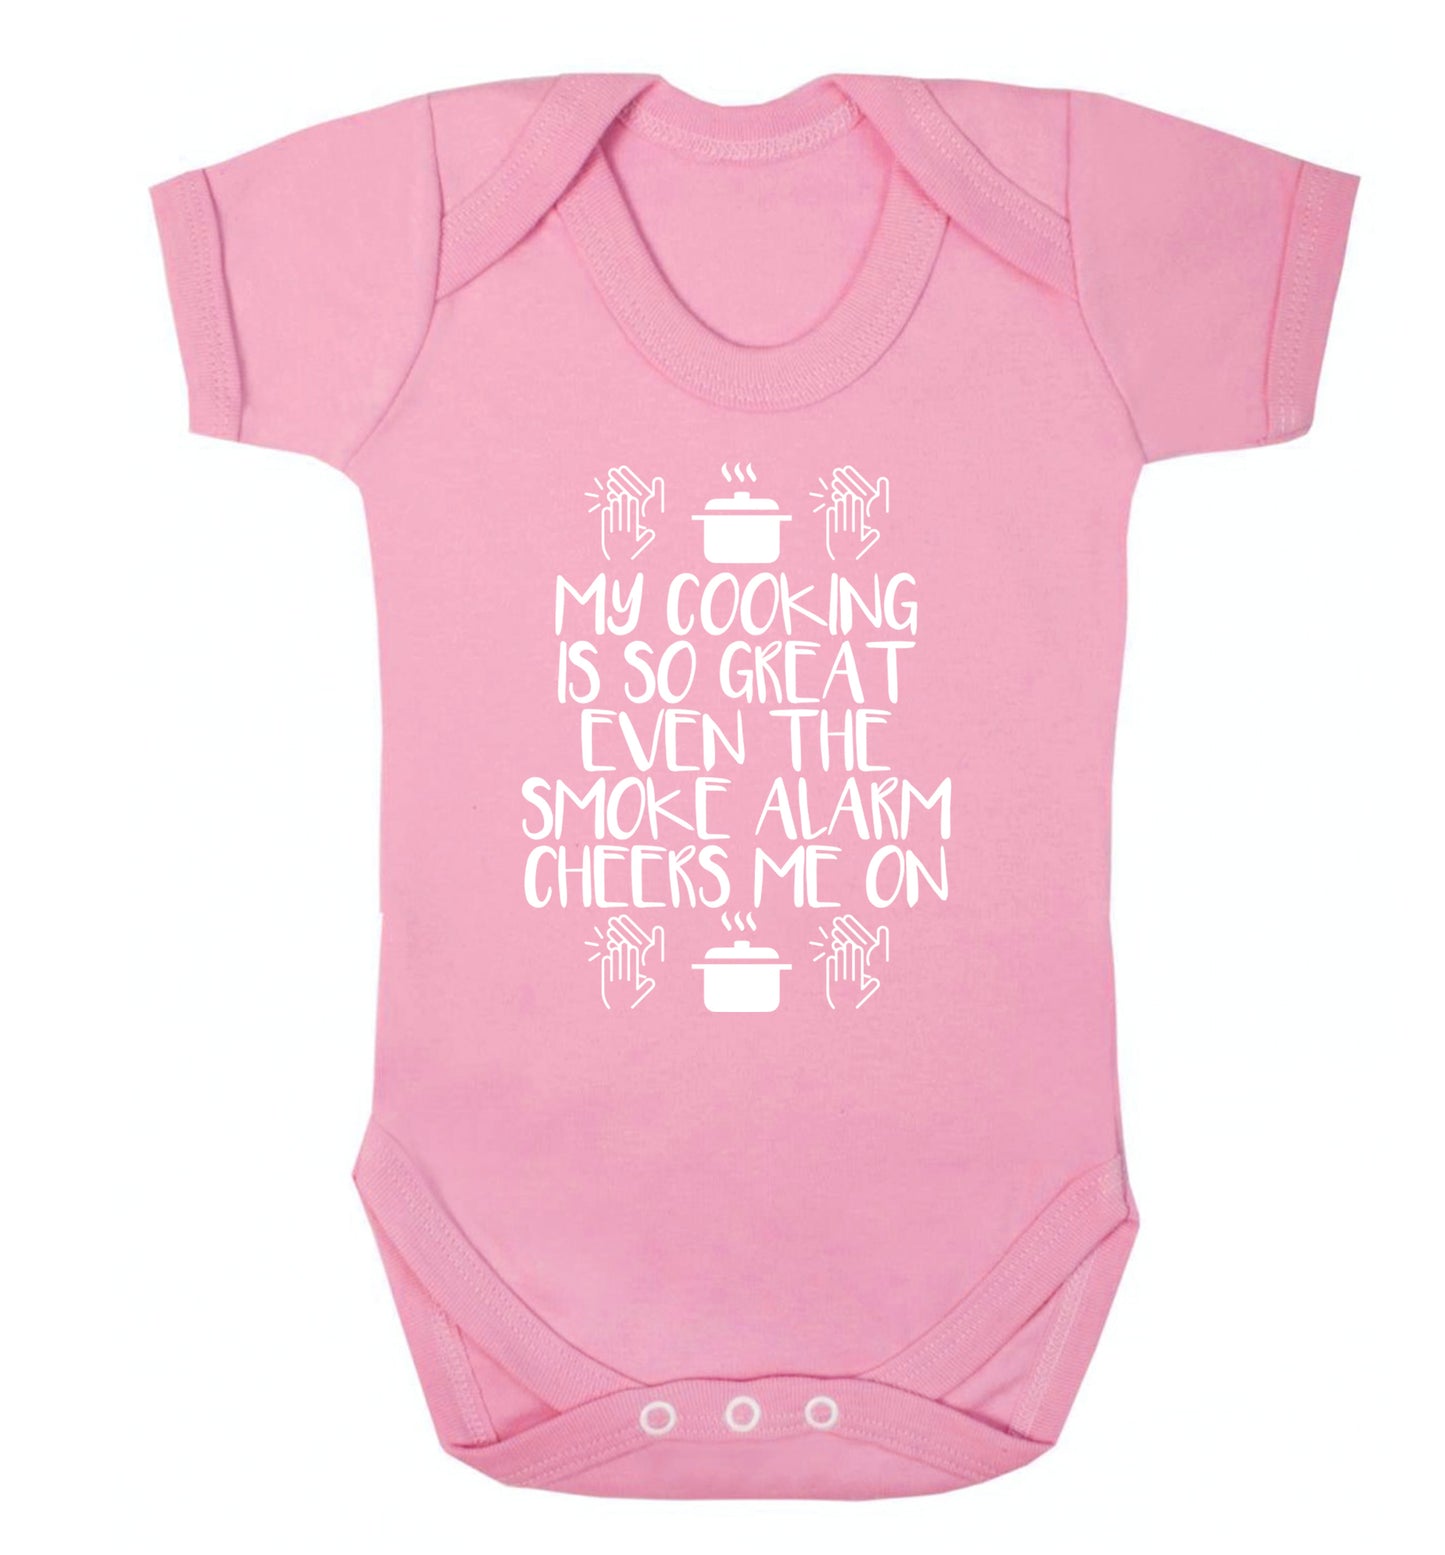 My cooking is so great even the smoke alarm cheers me on! Baby Vest pale pink 18-24 months